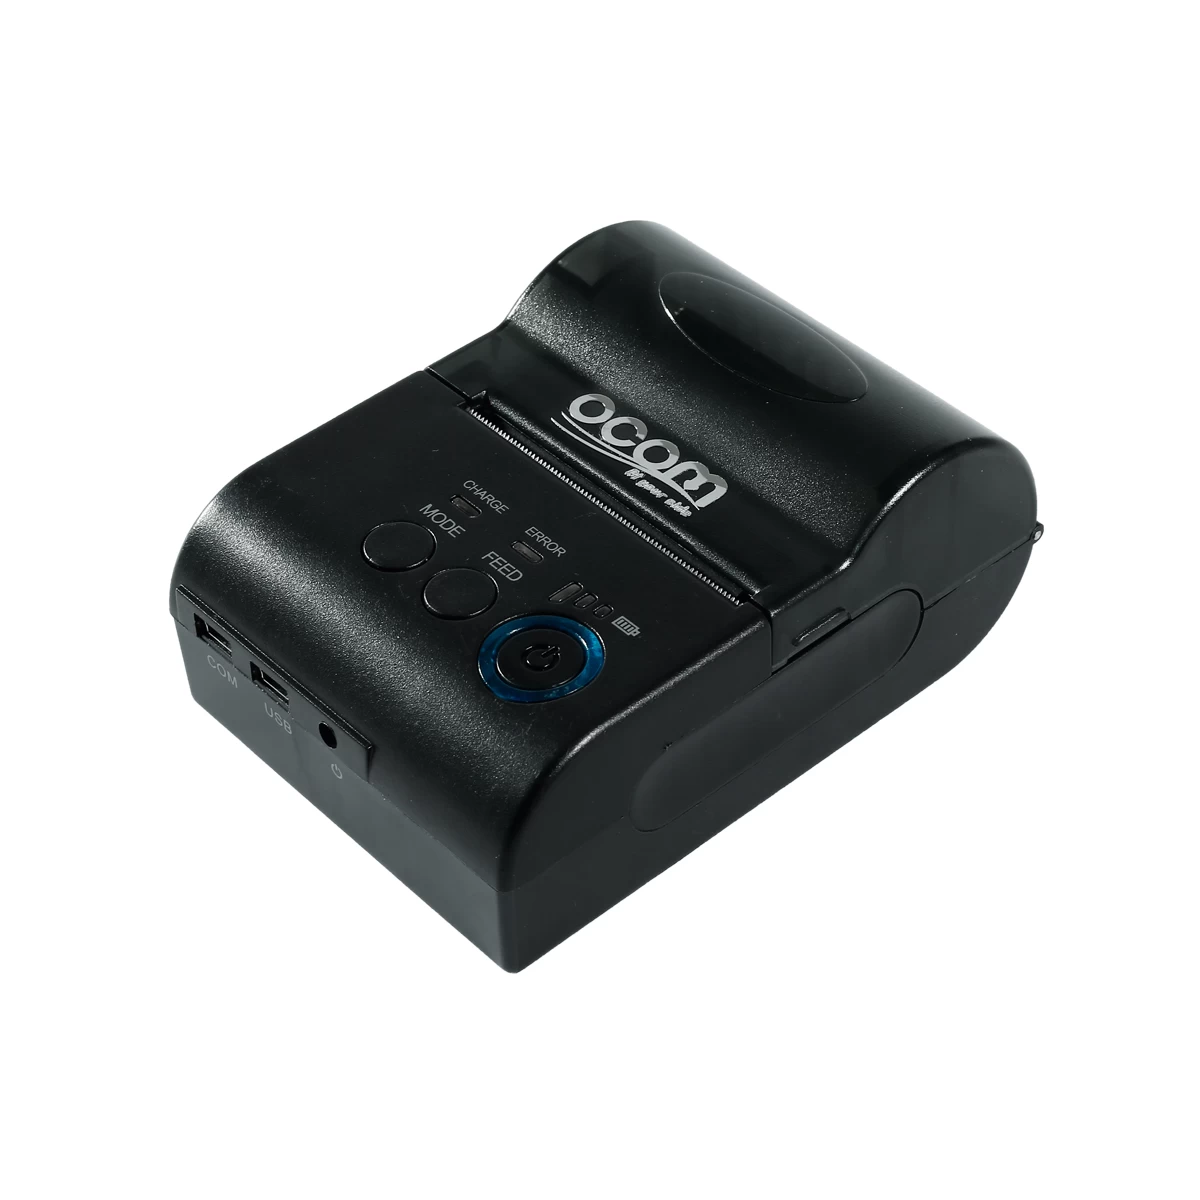 (OCPP-M03) Android IOS JAVA Windows Supported 58mm Small Bluetooth Mobile Pos Thermal Receipt Printer